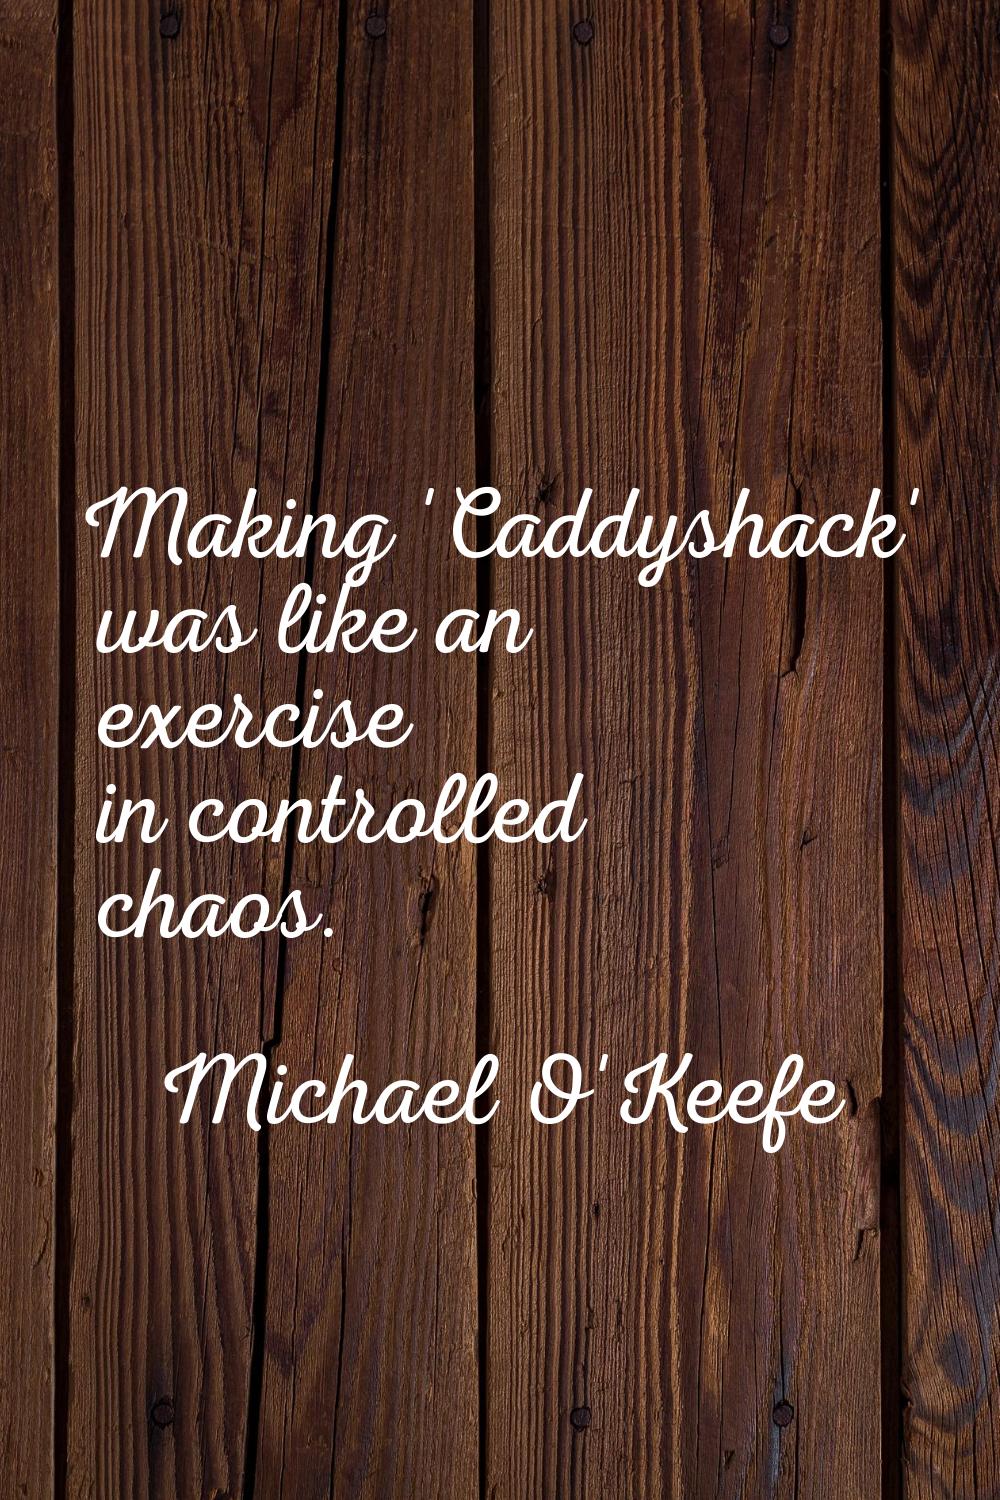 Making 'Caddyshack' was like an exercise in controlled chaos.